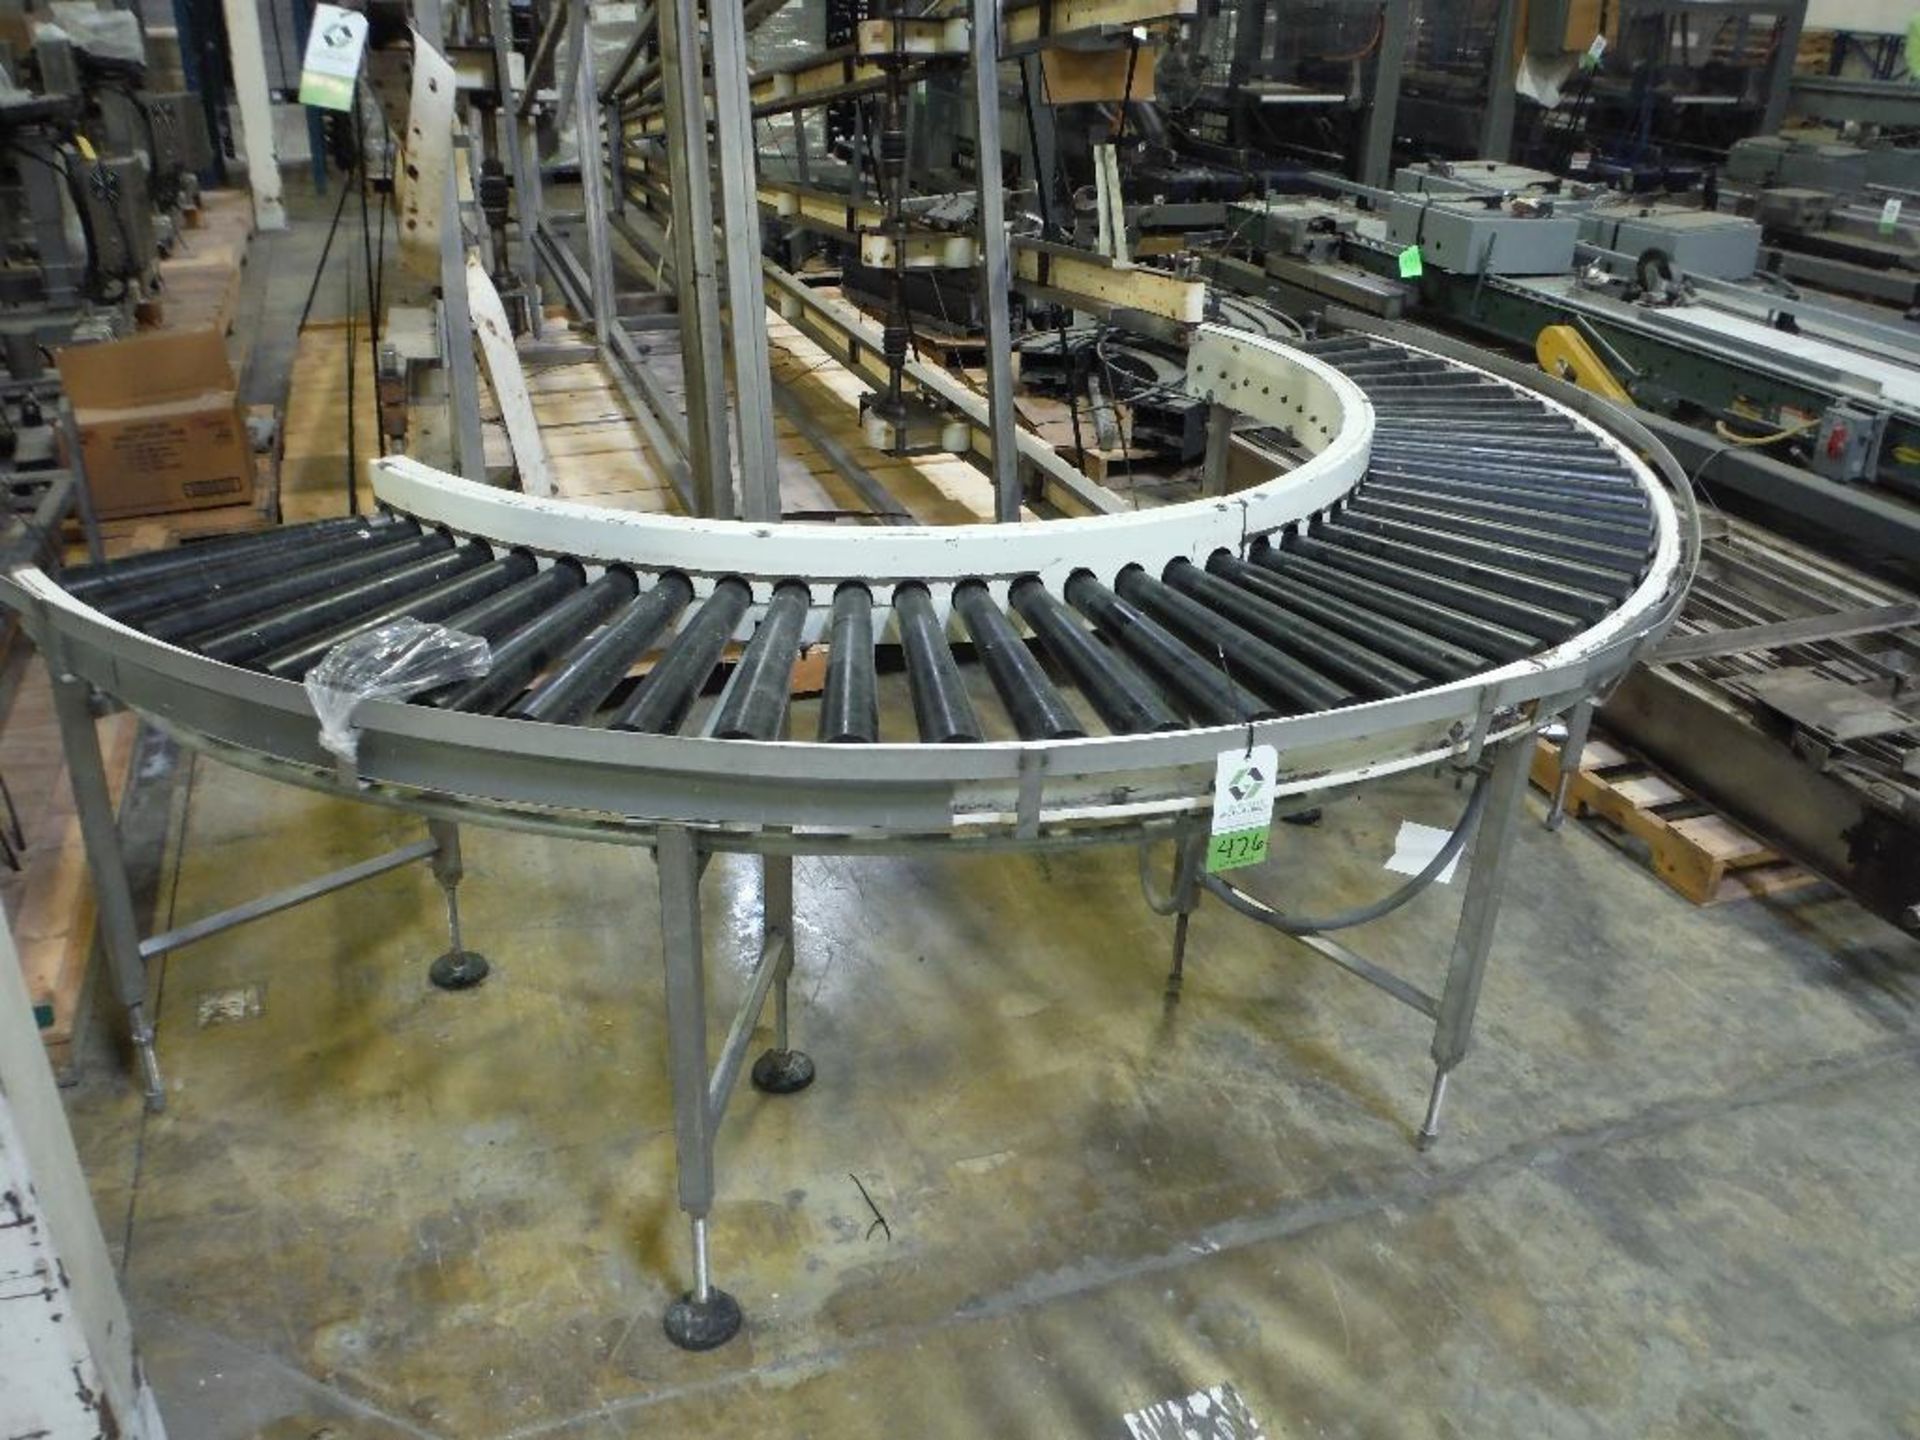 90 degree powered roller conveyor, 18 in. wide, 112 in. long overall, carbon steel frame, motor and